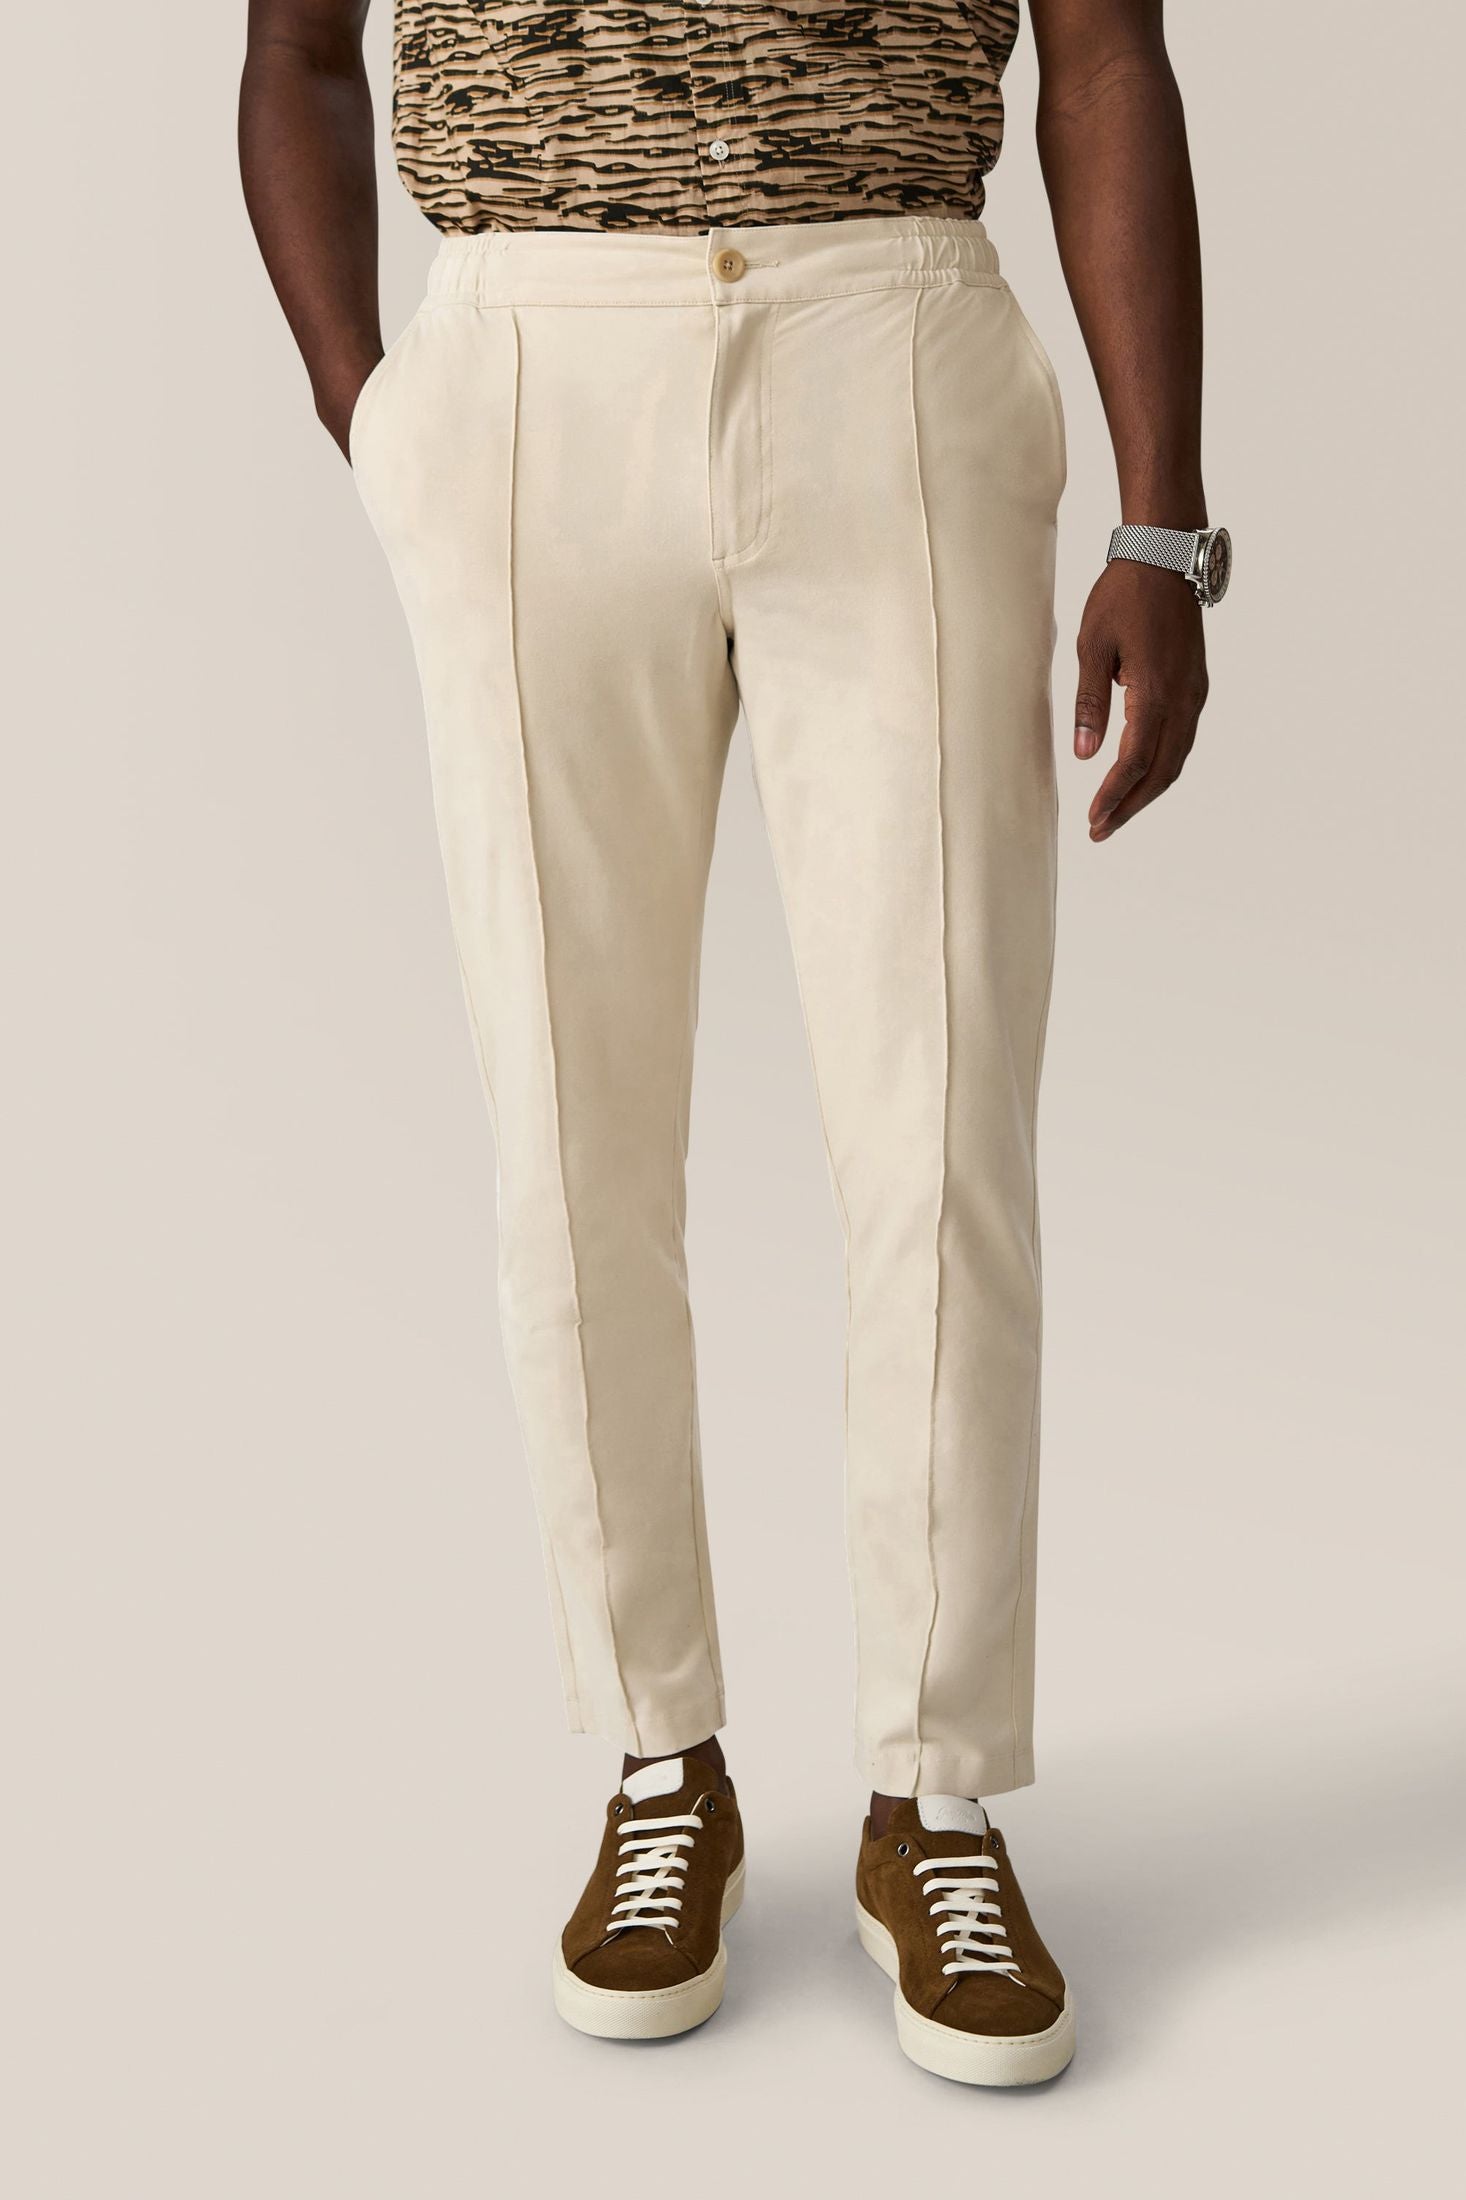 How To Coordinate White Shoes With Different Trouser Colors -